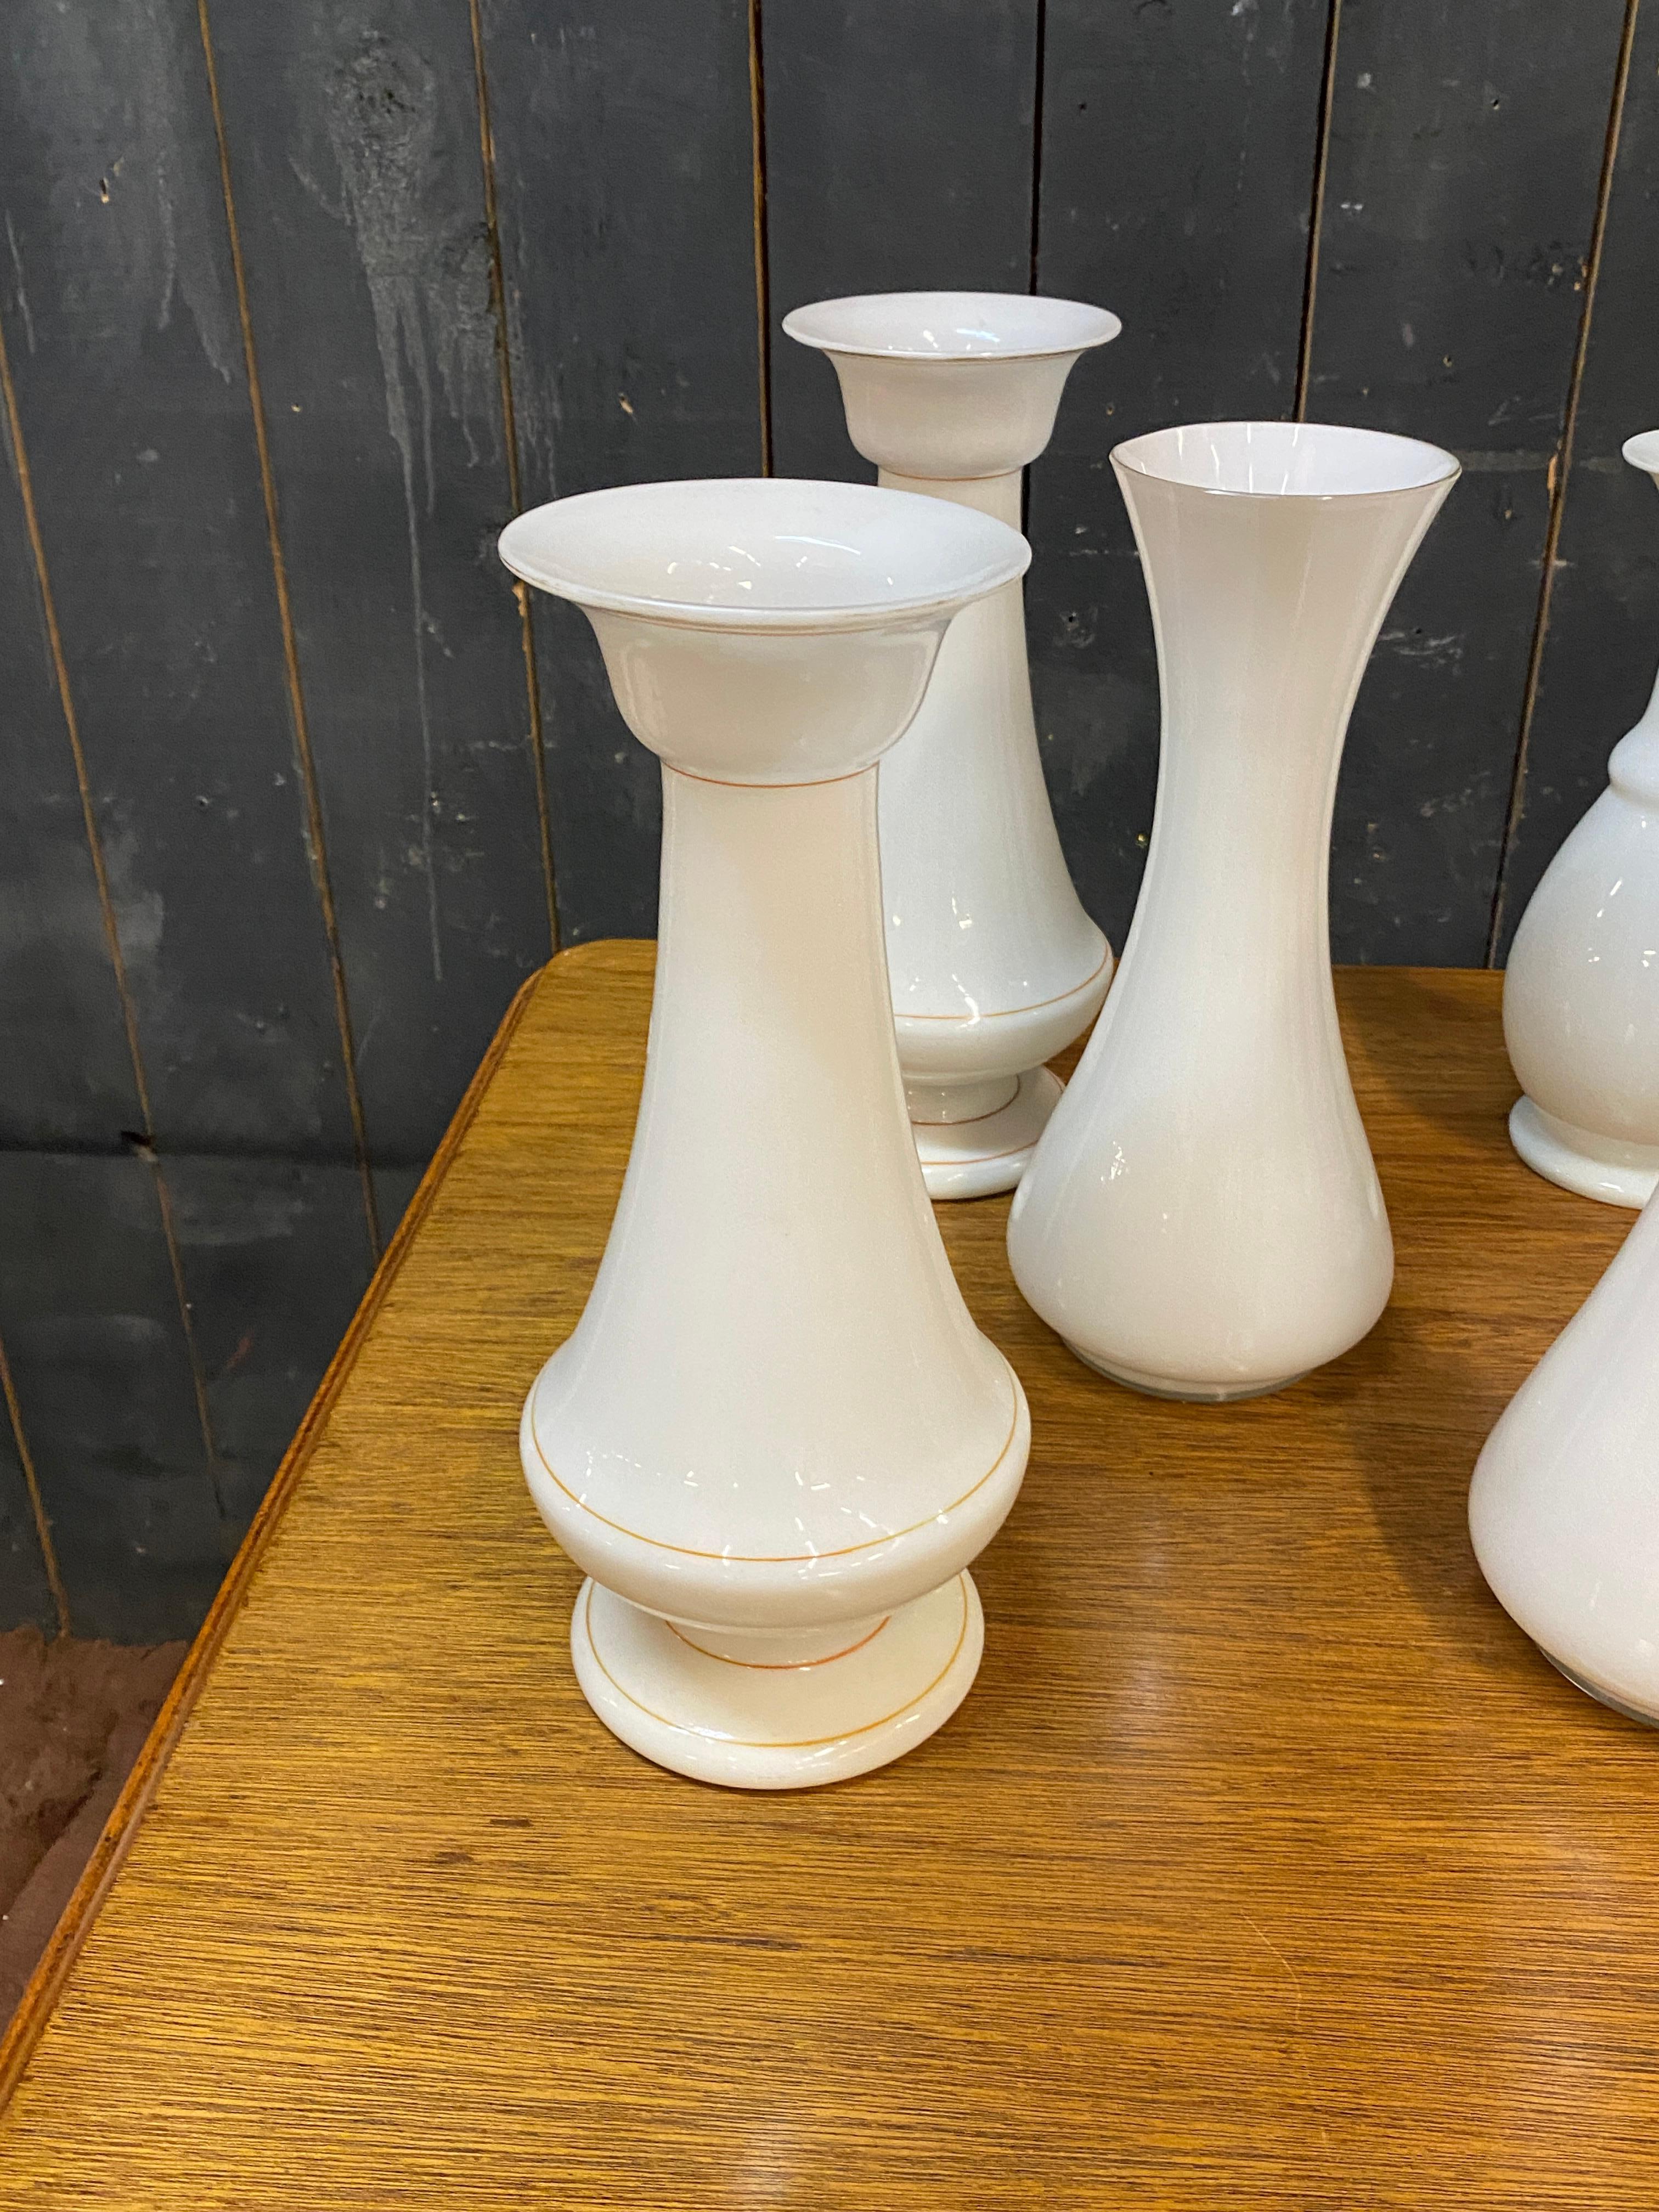 Lot of 9 original opaline vases from the Napoleon III period, height from 11.42